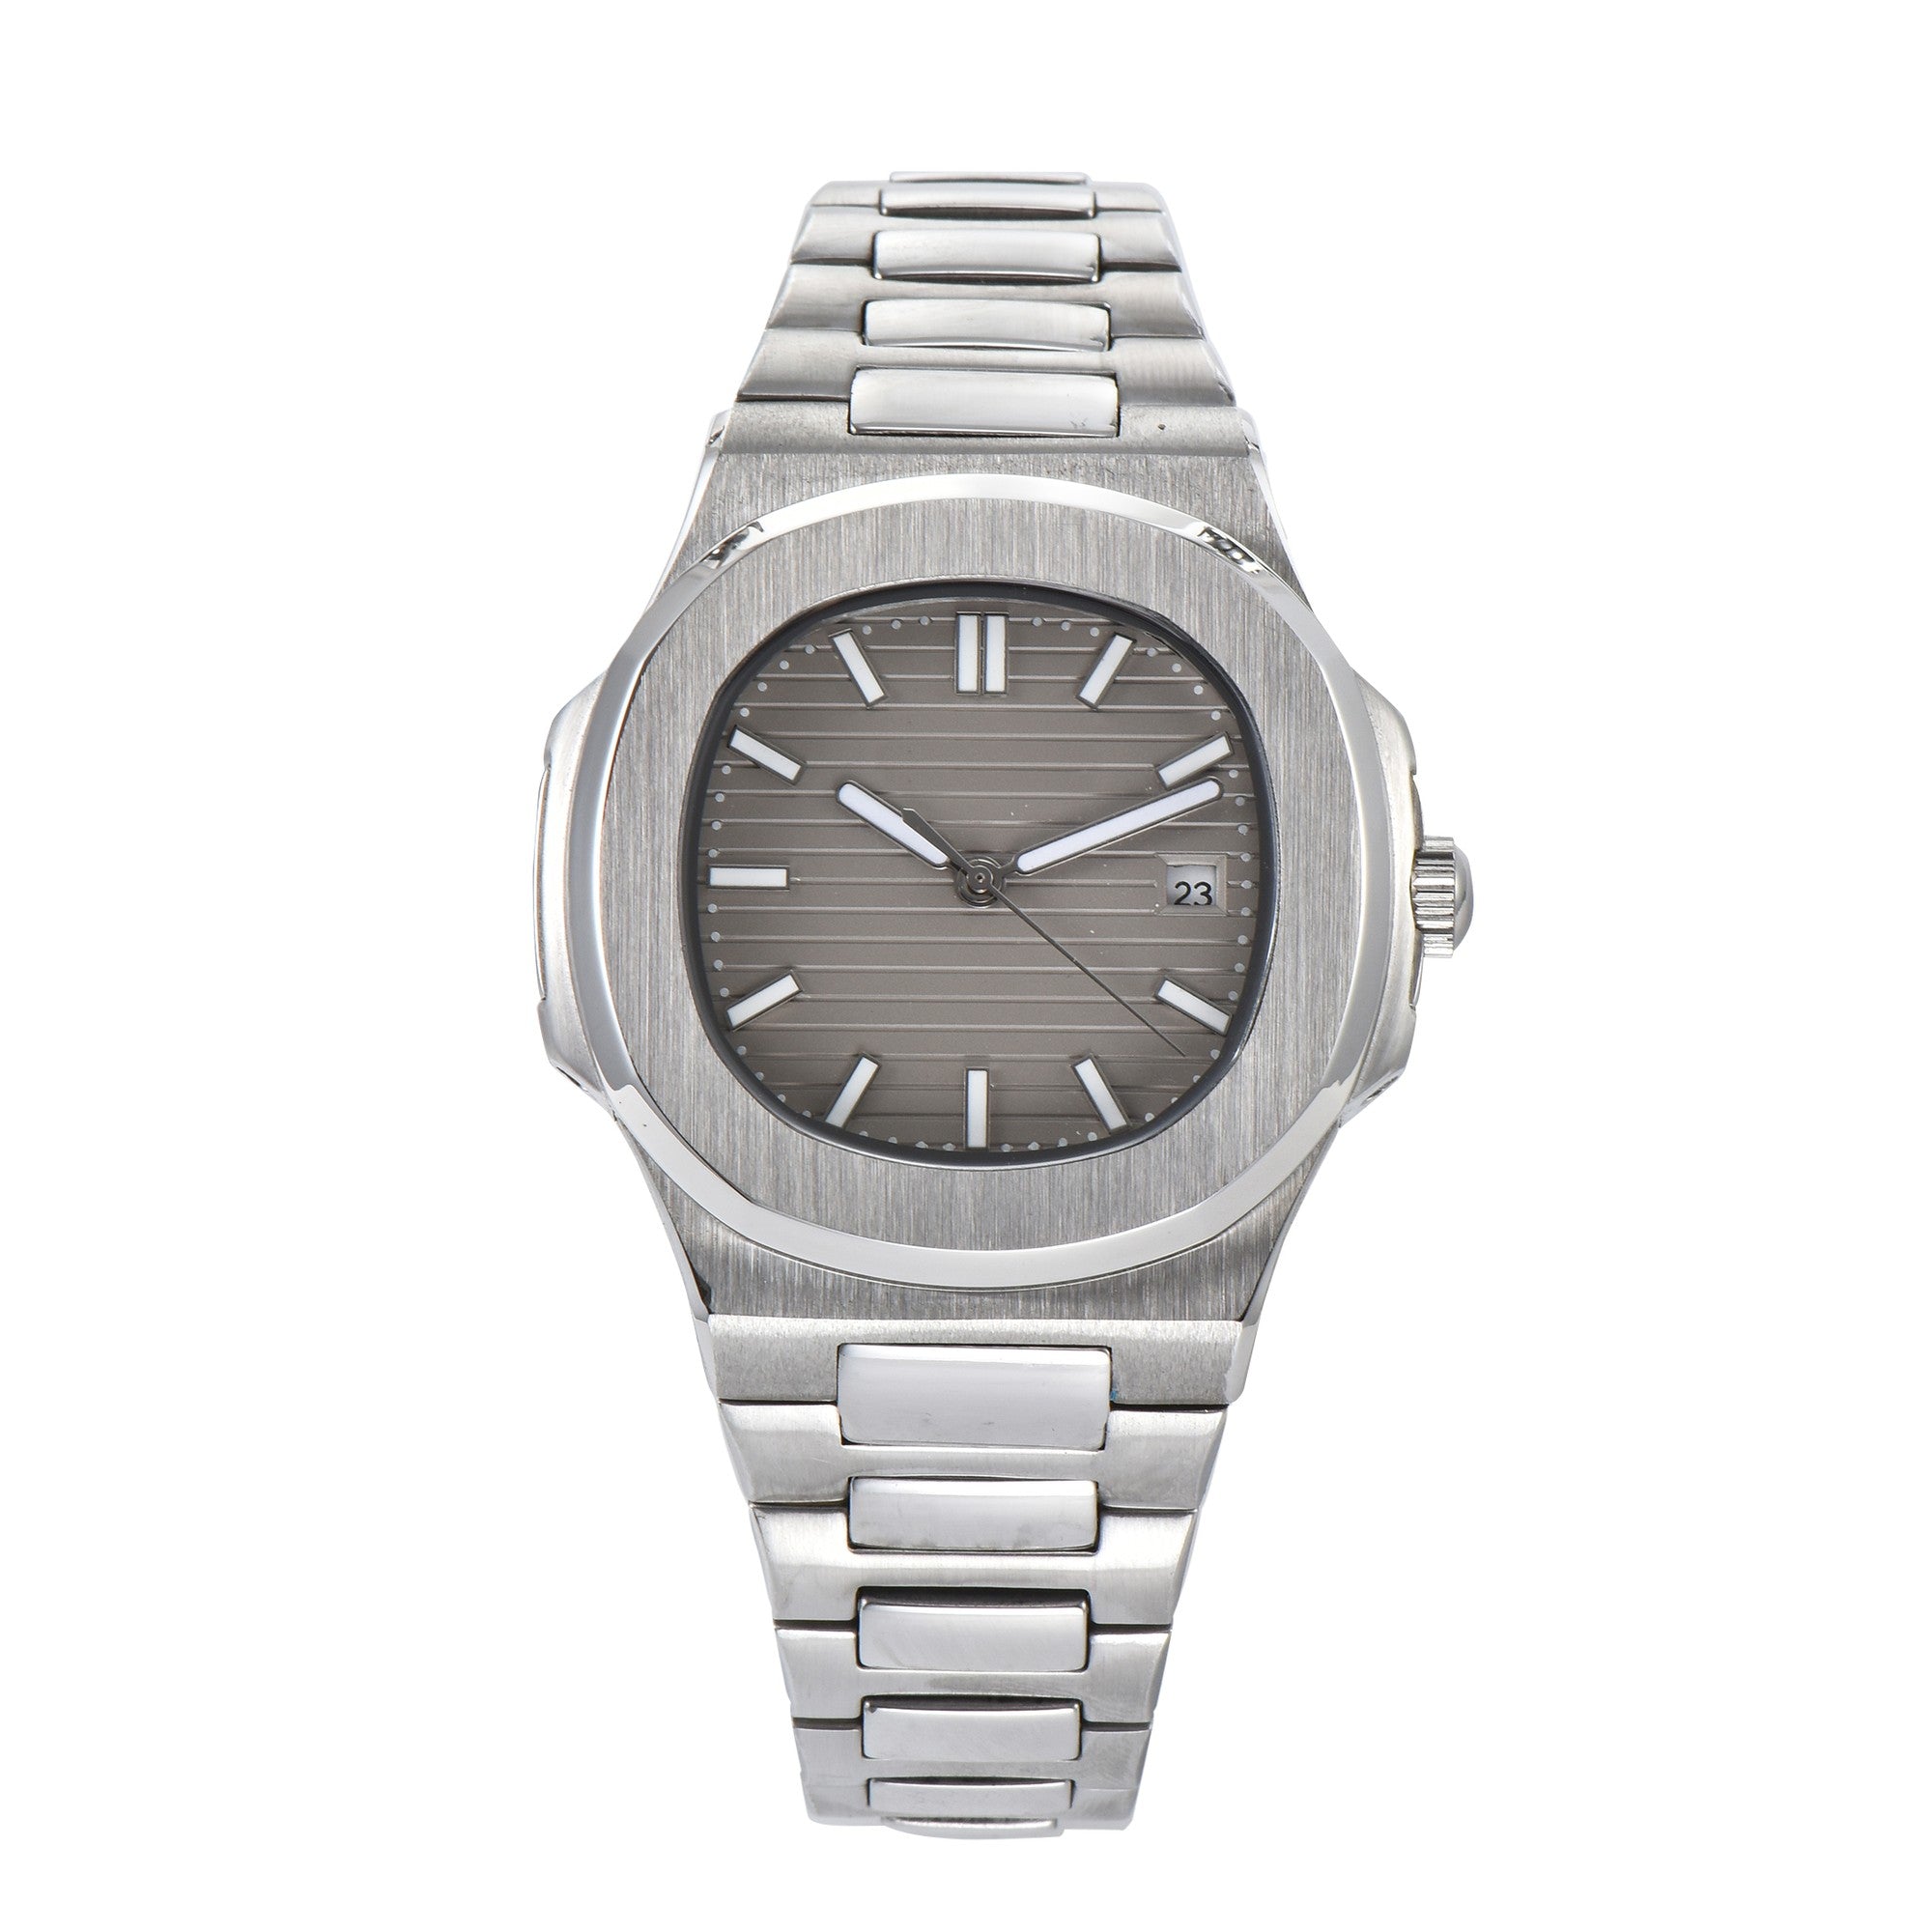 Nautilus Mechanical Men's Automatic: Stainless Steel Watch / Silver / Suit, Luxury Popular Brand / Fashion PP90